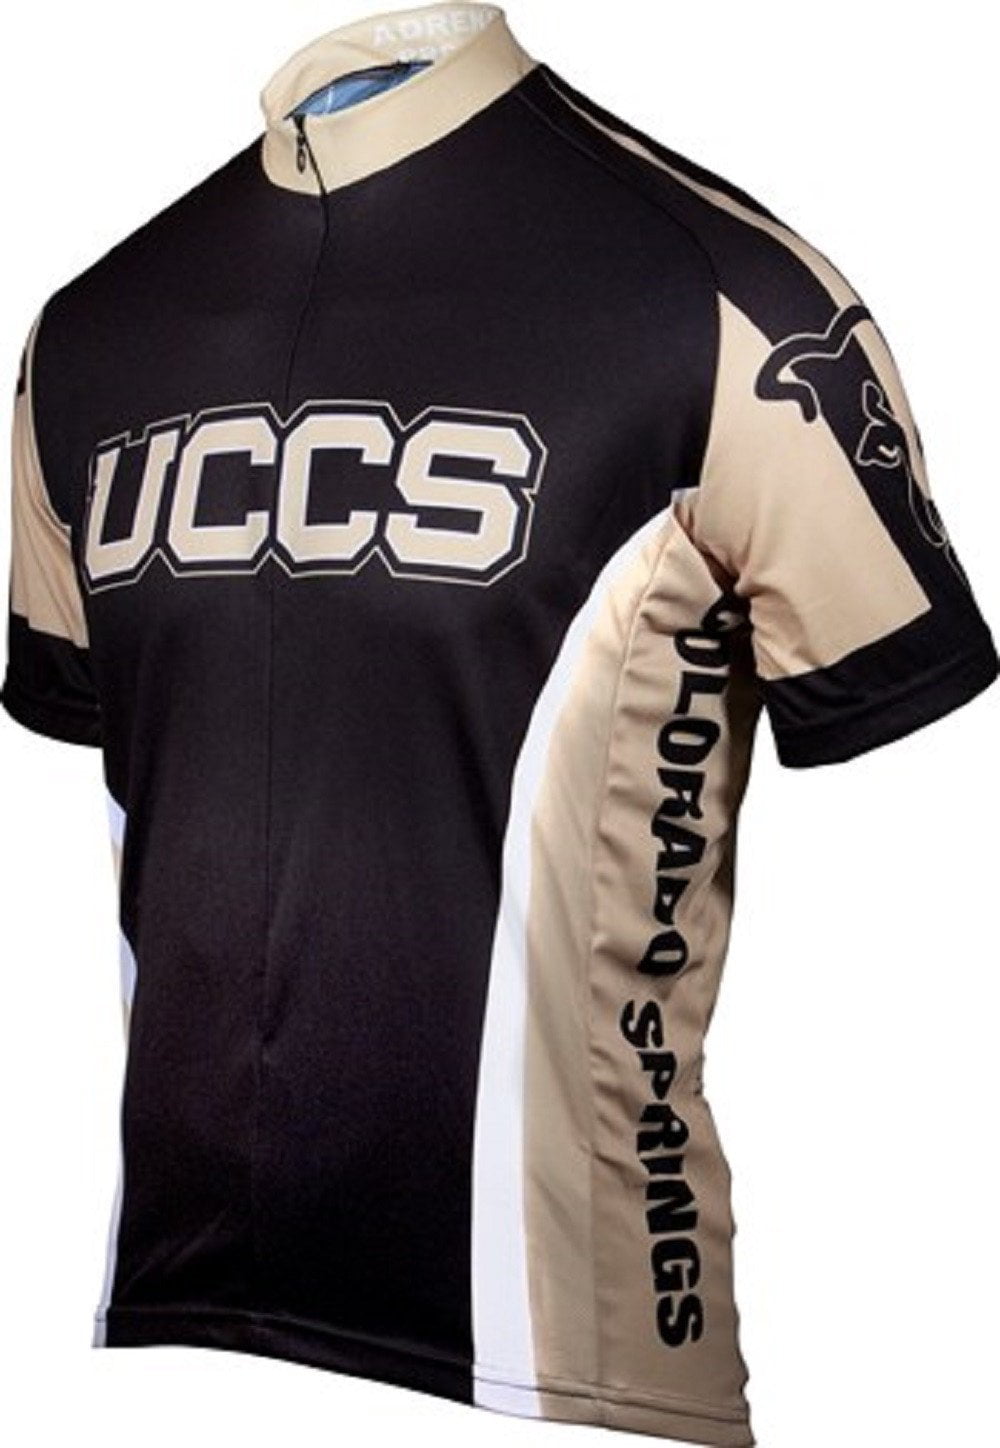 NCAA Men's Adrenaline Promotions Colorado State University Cycling Jersey 